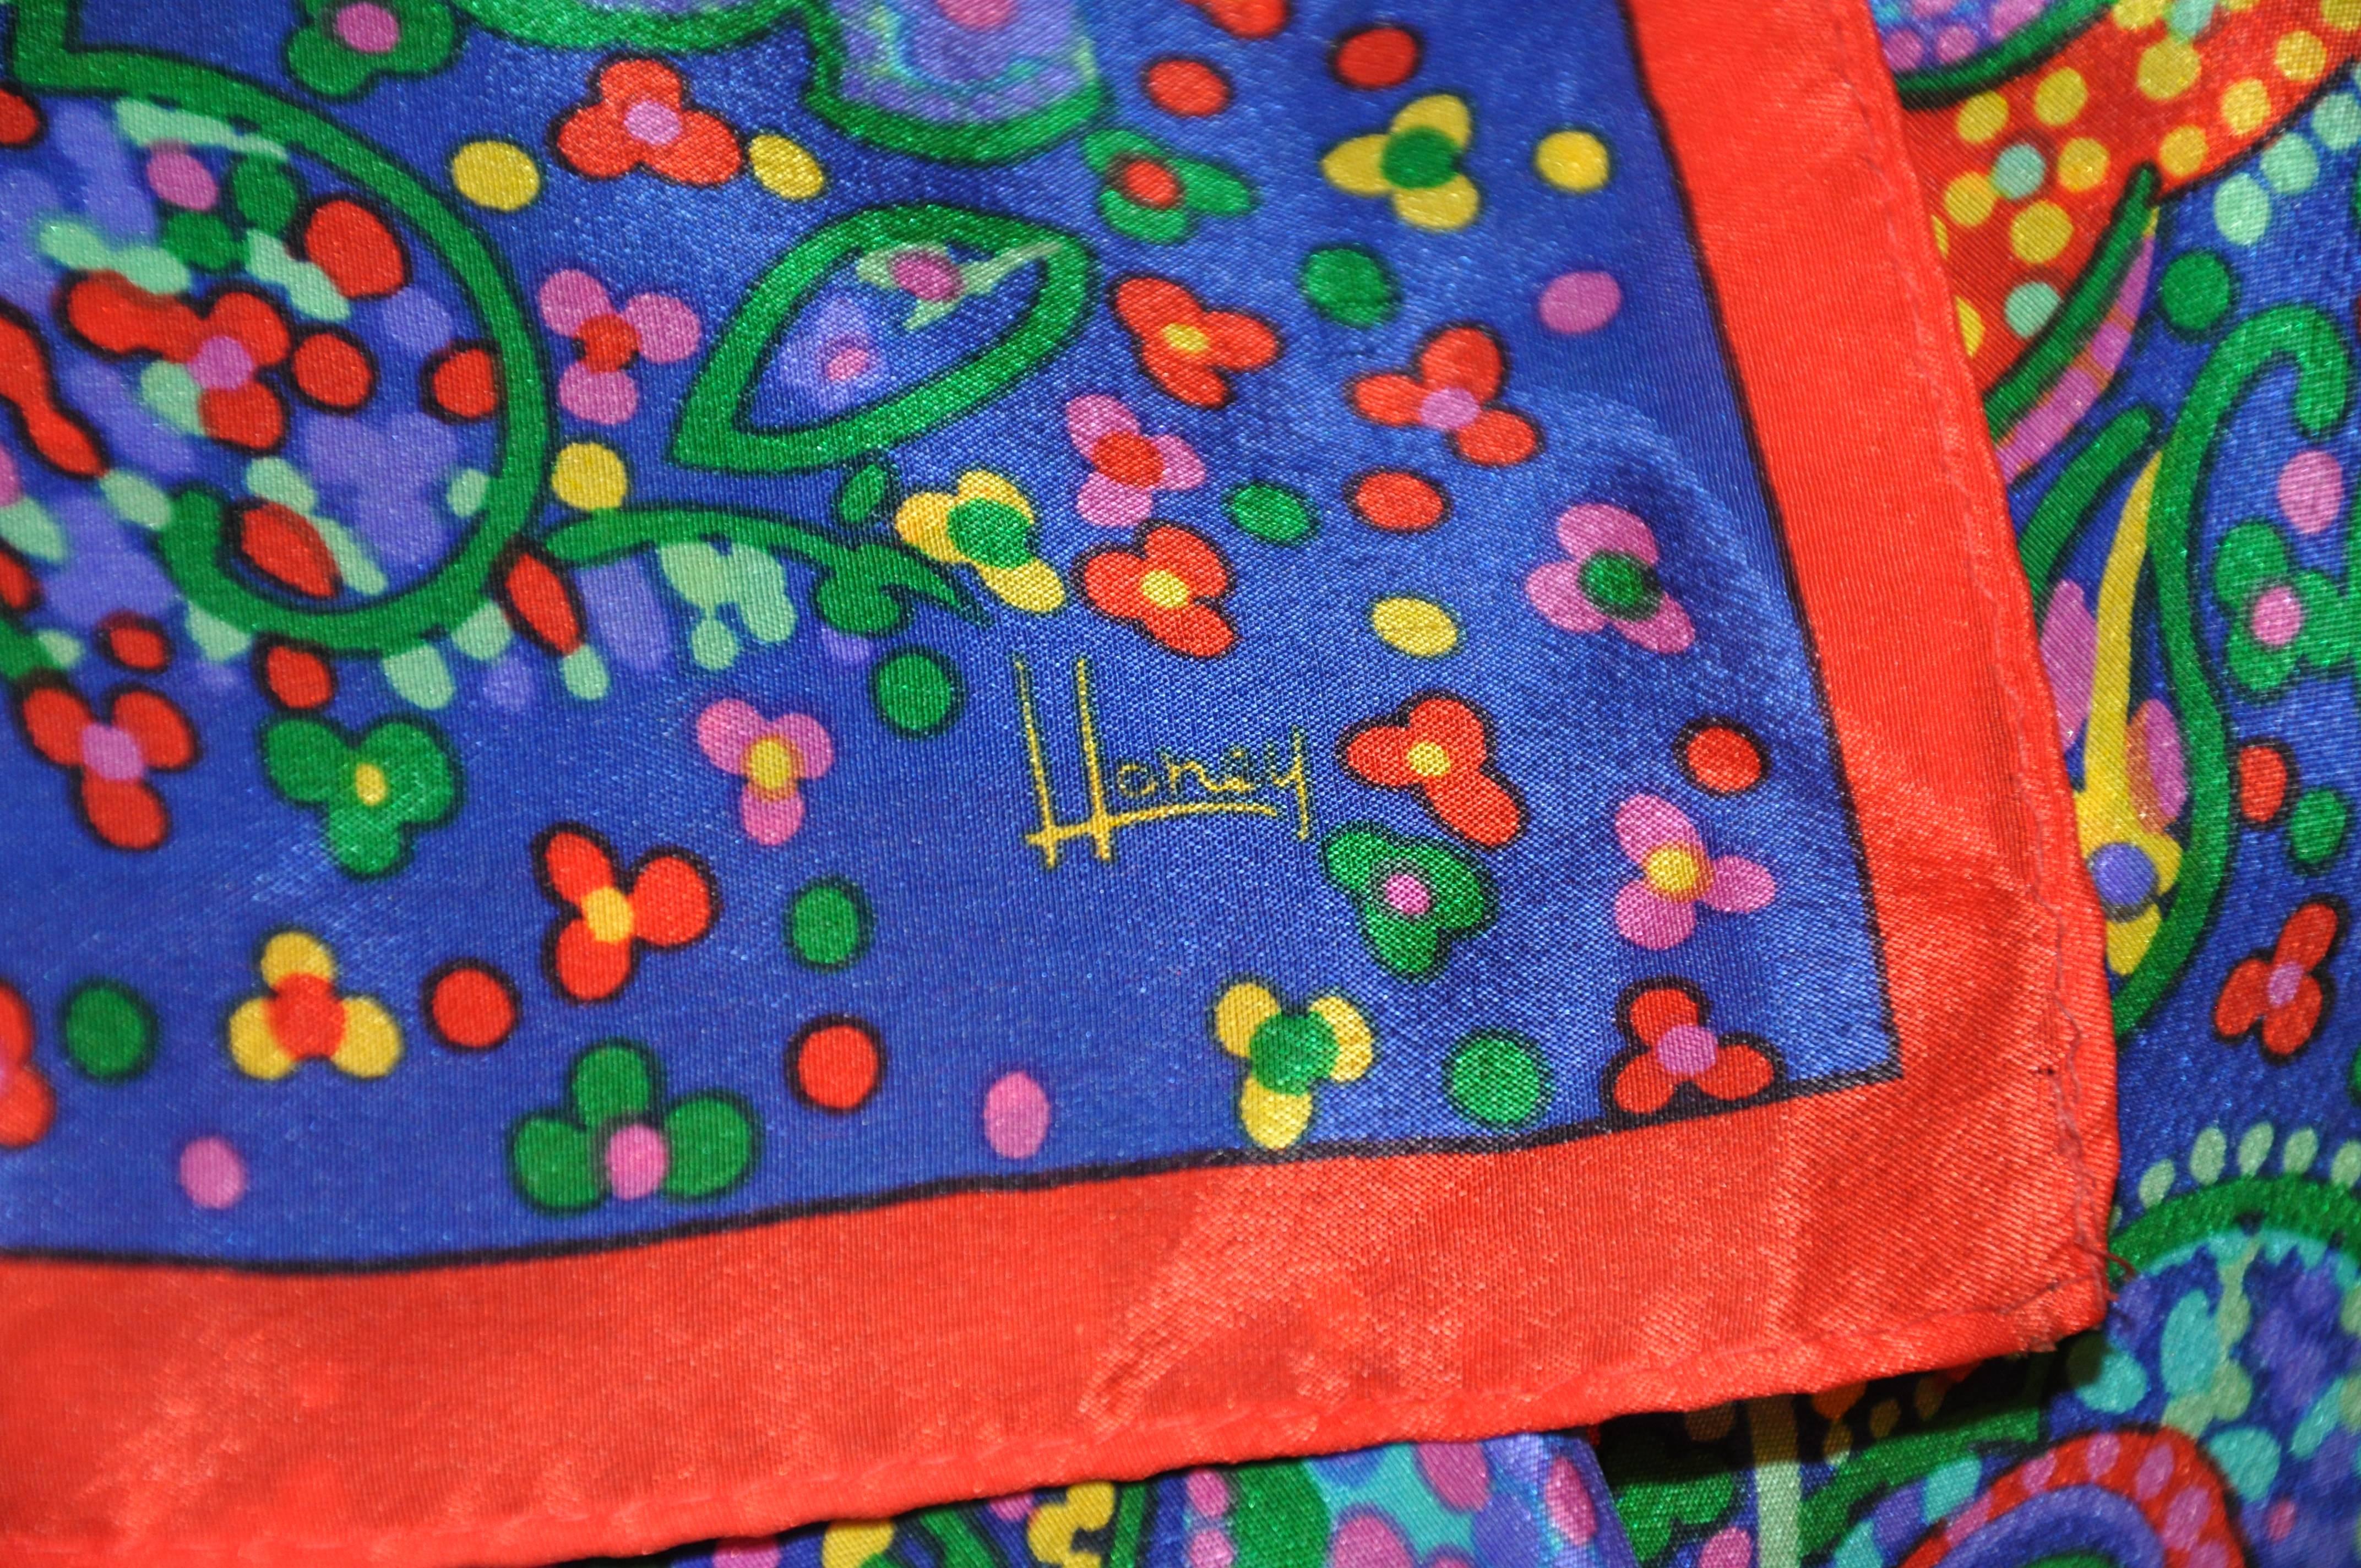         Honey's wonderfully bright multi-color with multi-sizes of floral combined with palsey print silk scarf measures 30